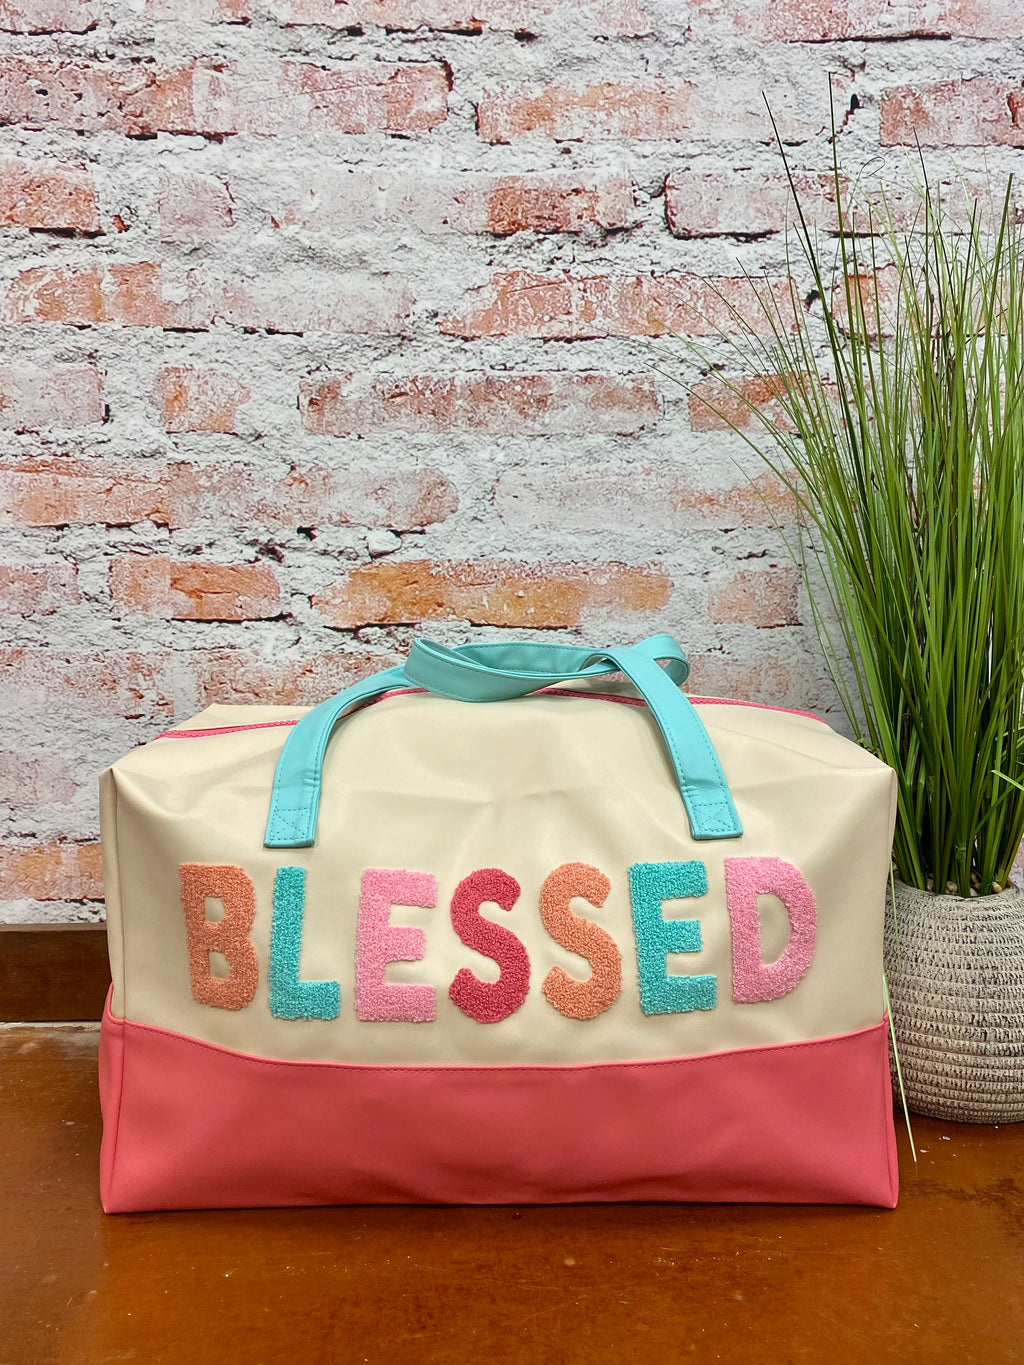 "Blessed" Duffle Bag